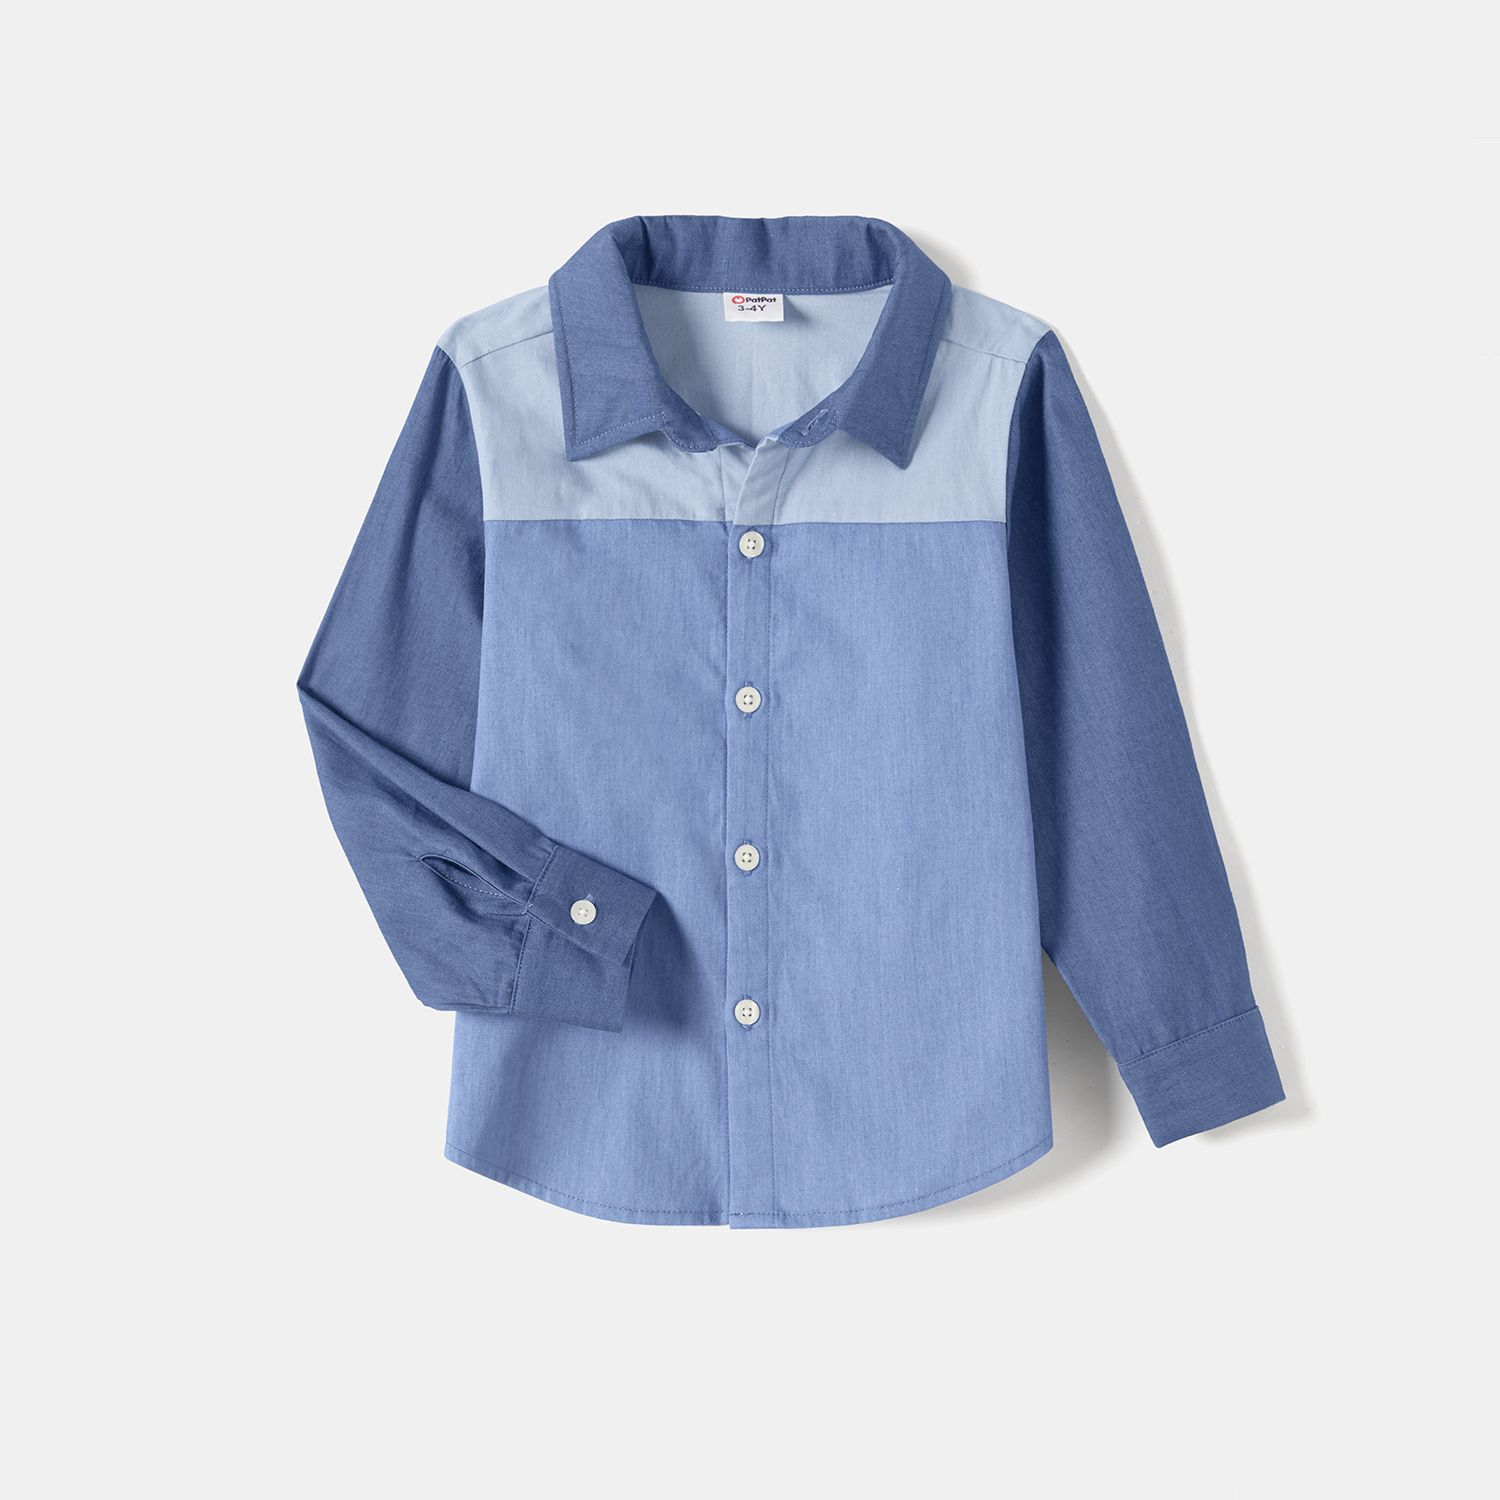 Family Matching Denim Belted High Low Hem Belted Dresses And Long-sleeve Tops Sets